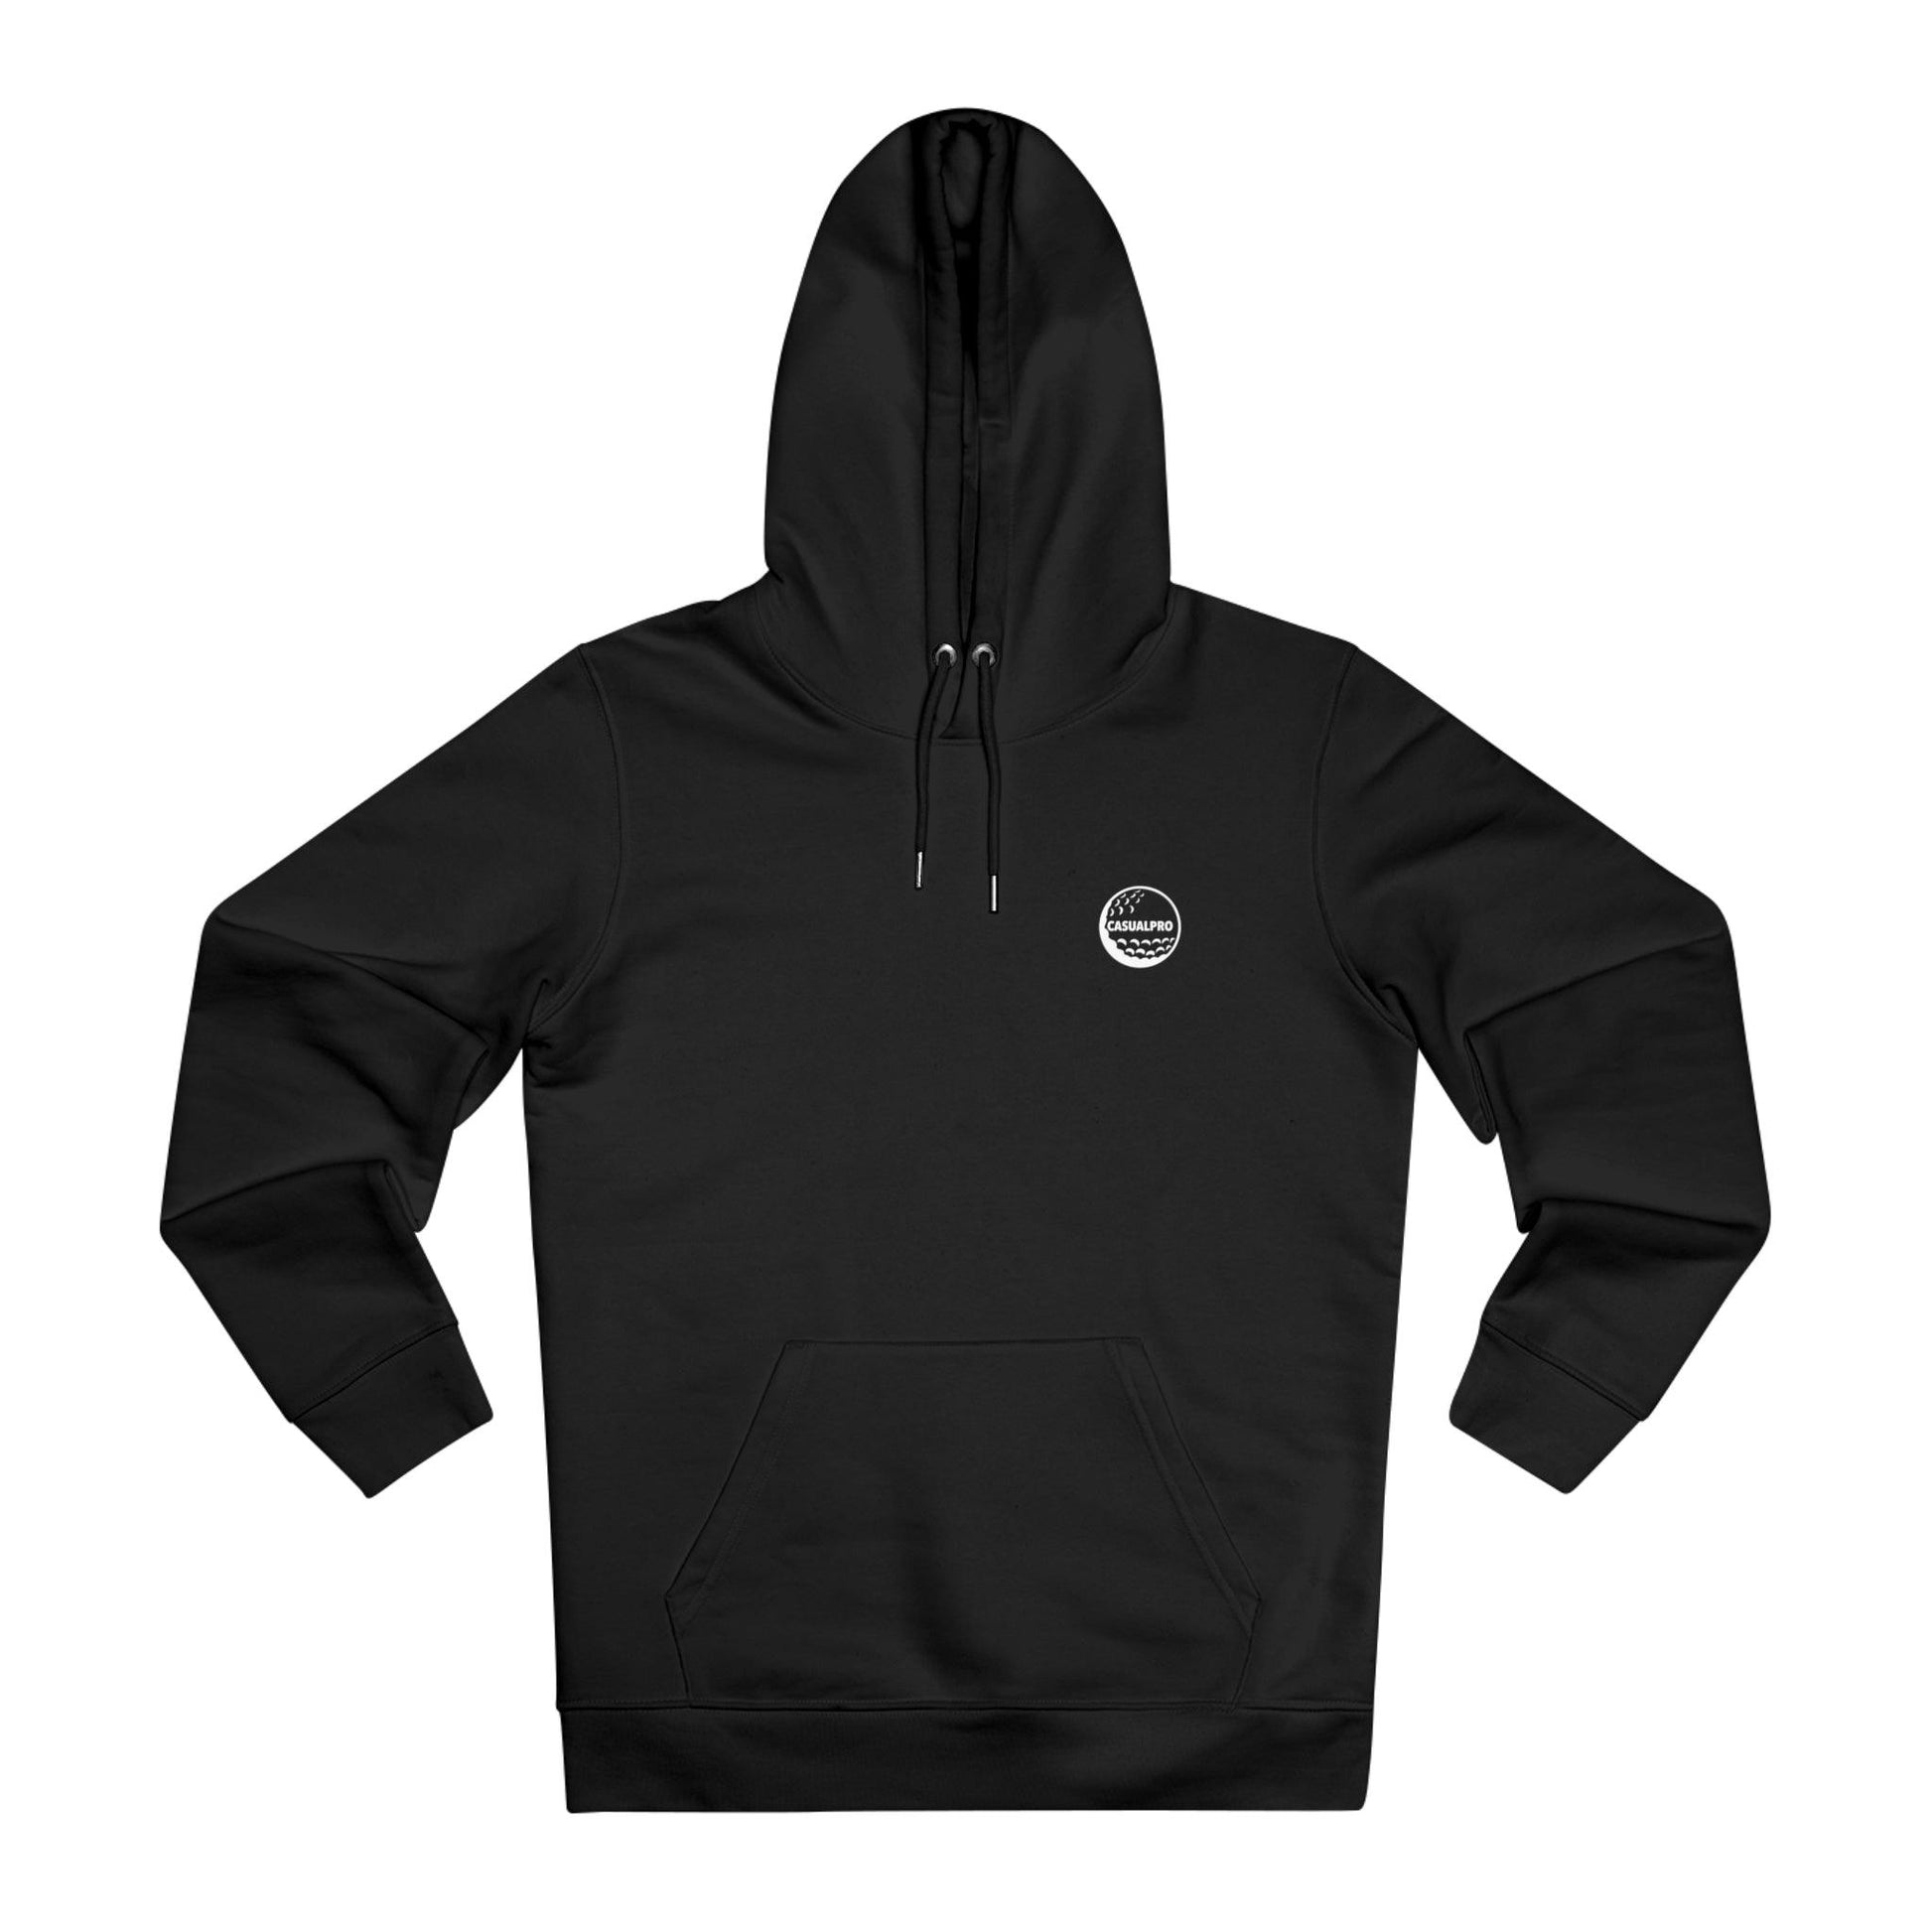 Black hoodie with print on the front